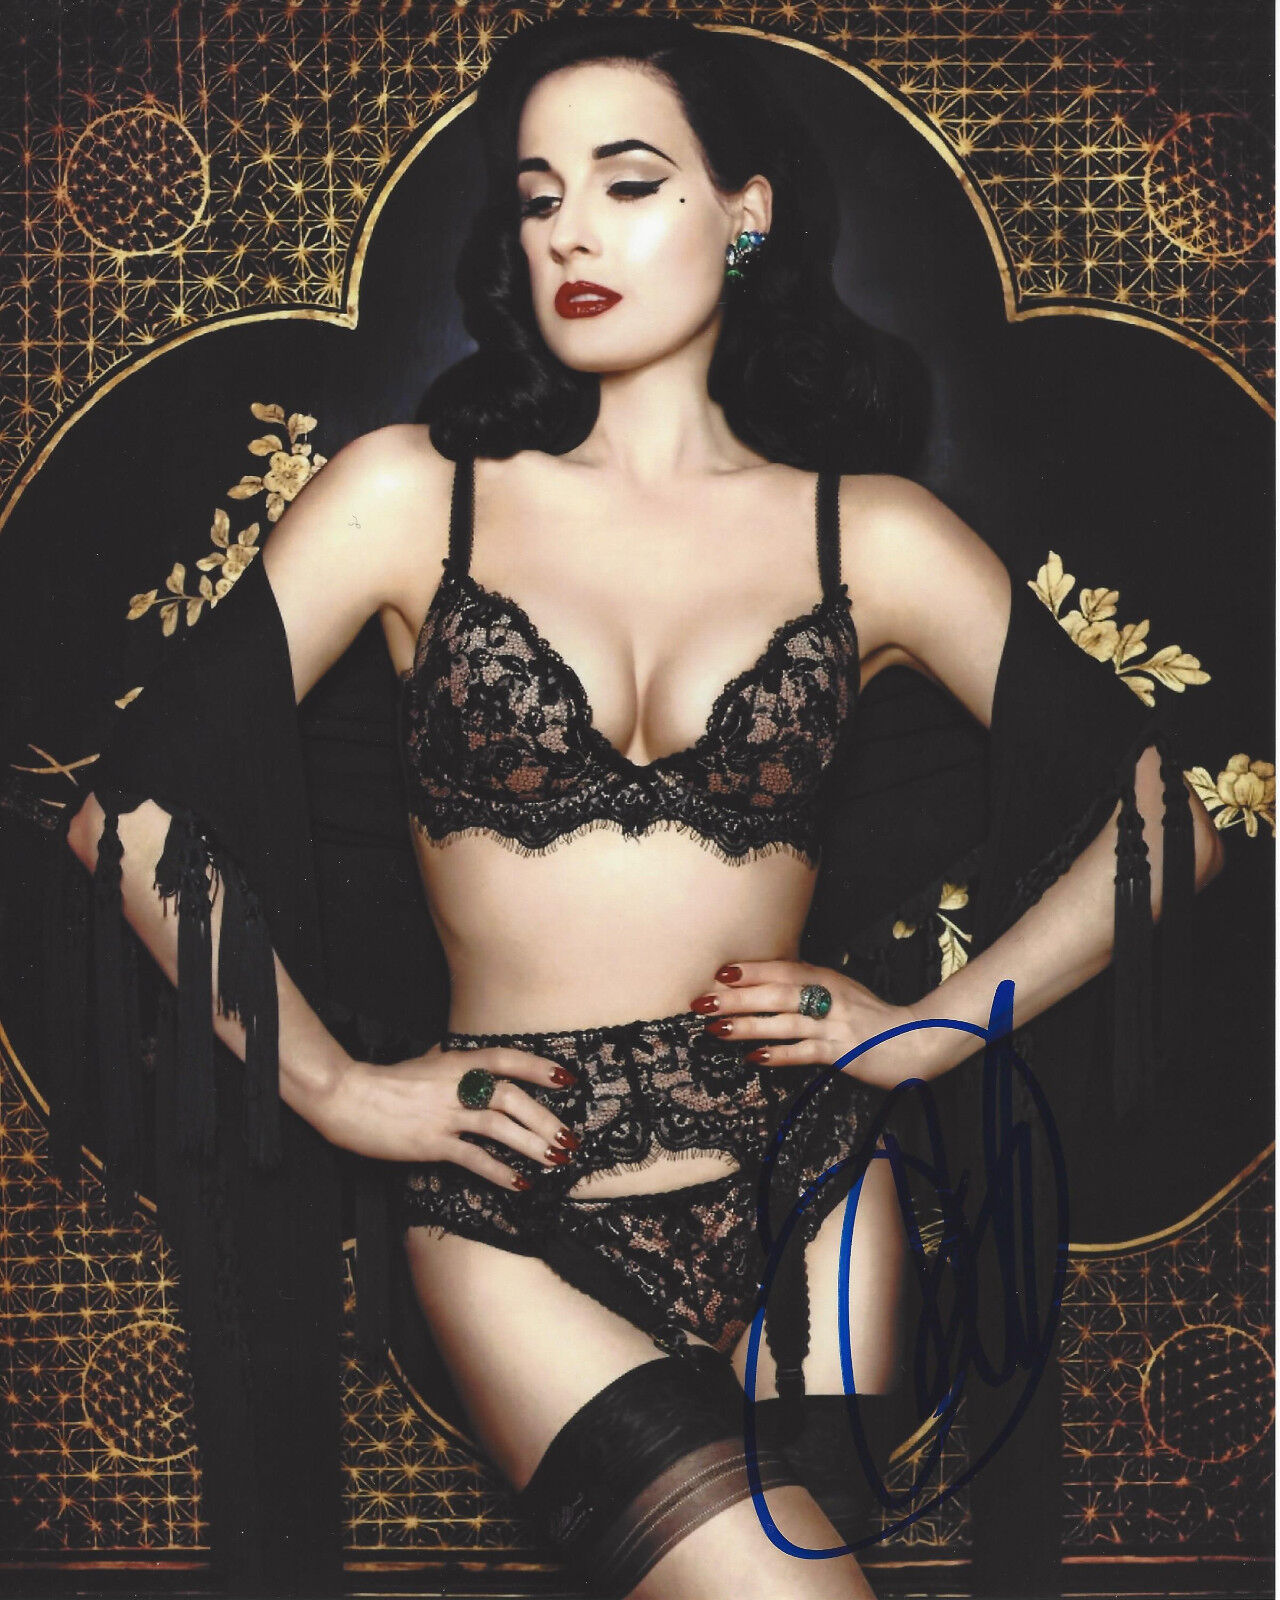 DITA VON TEESE SIGNED AUTHENTIC SEXY 8X10 Photo Poster painting 6 w/COA BURLESQUE MODEL ACTRESS